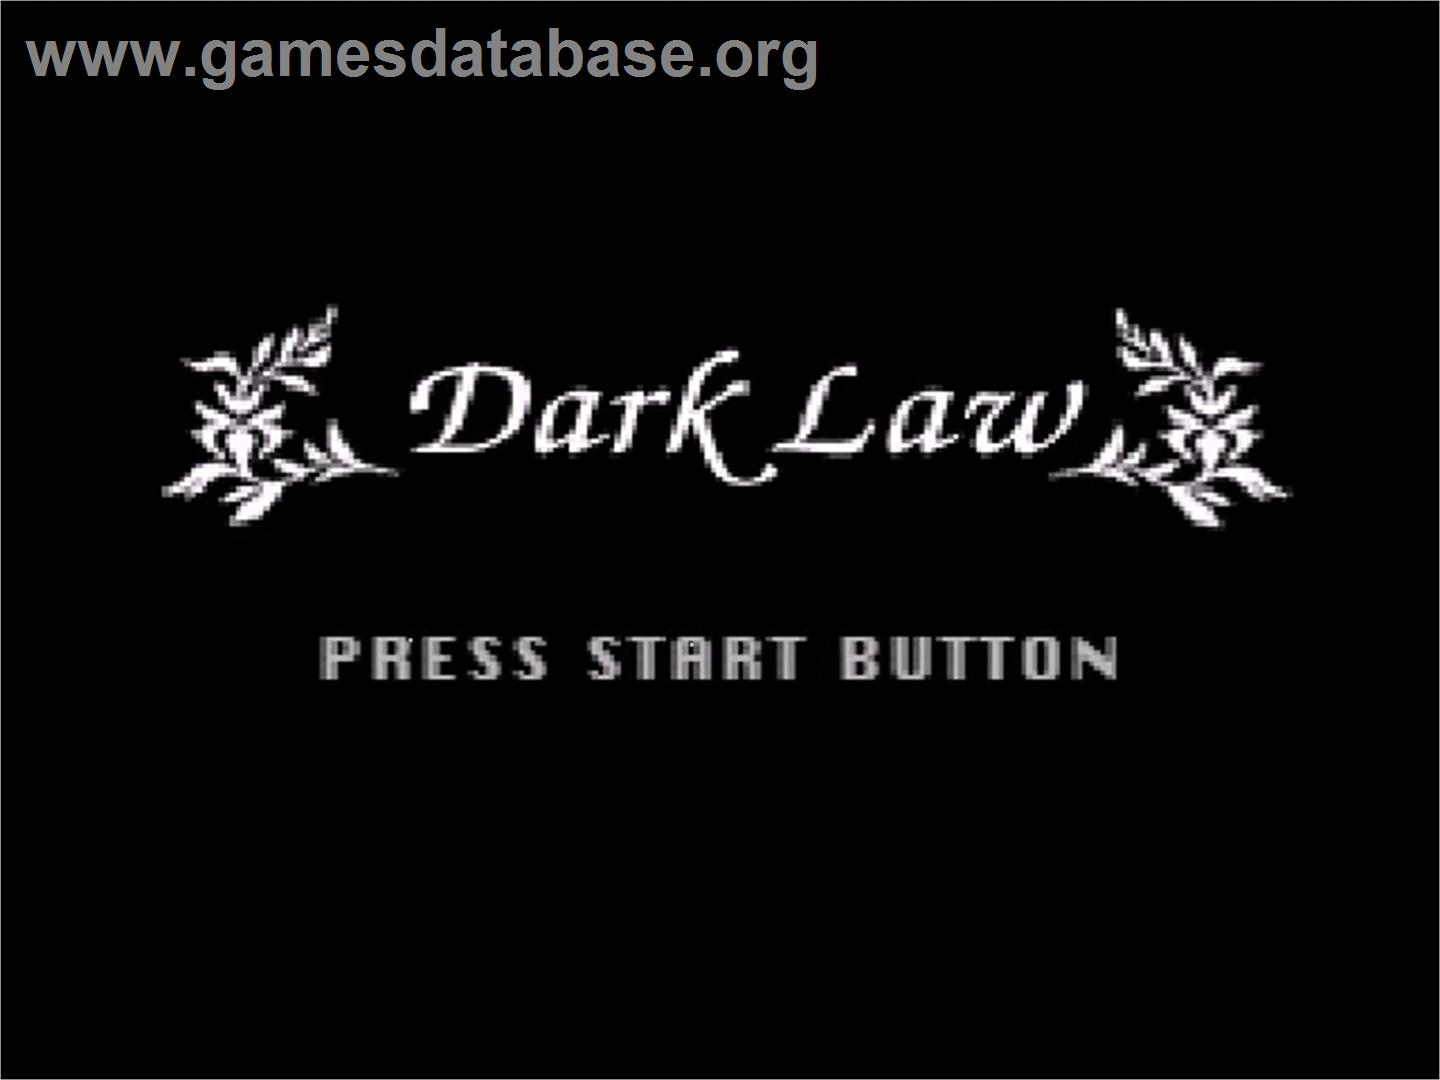 Dark Law: The Meaning of Death - Nintendo SNES - Artwork - Title Screen